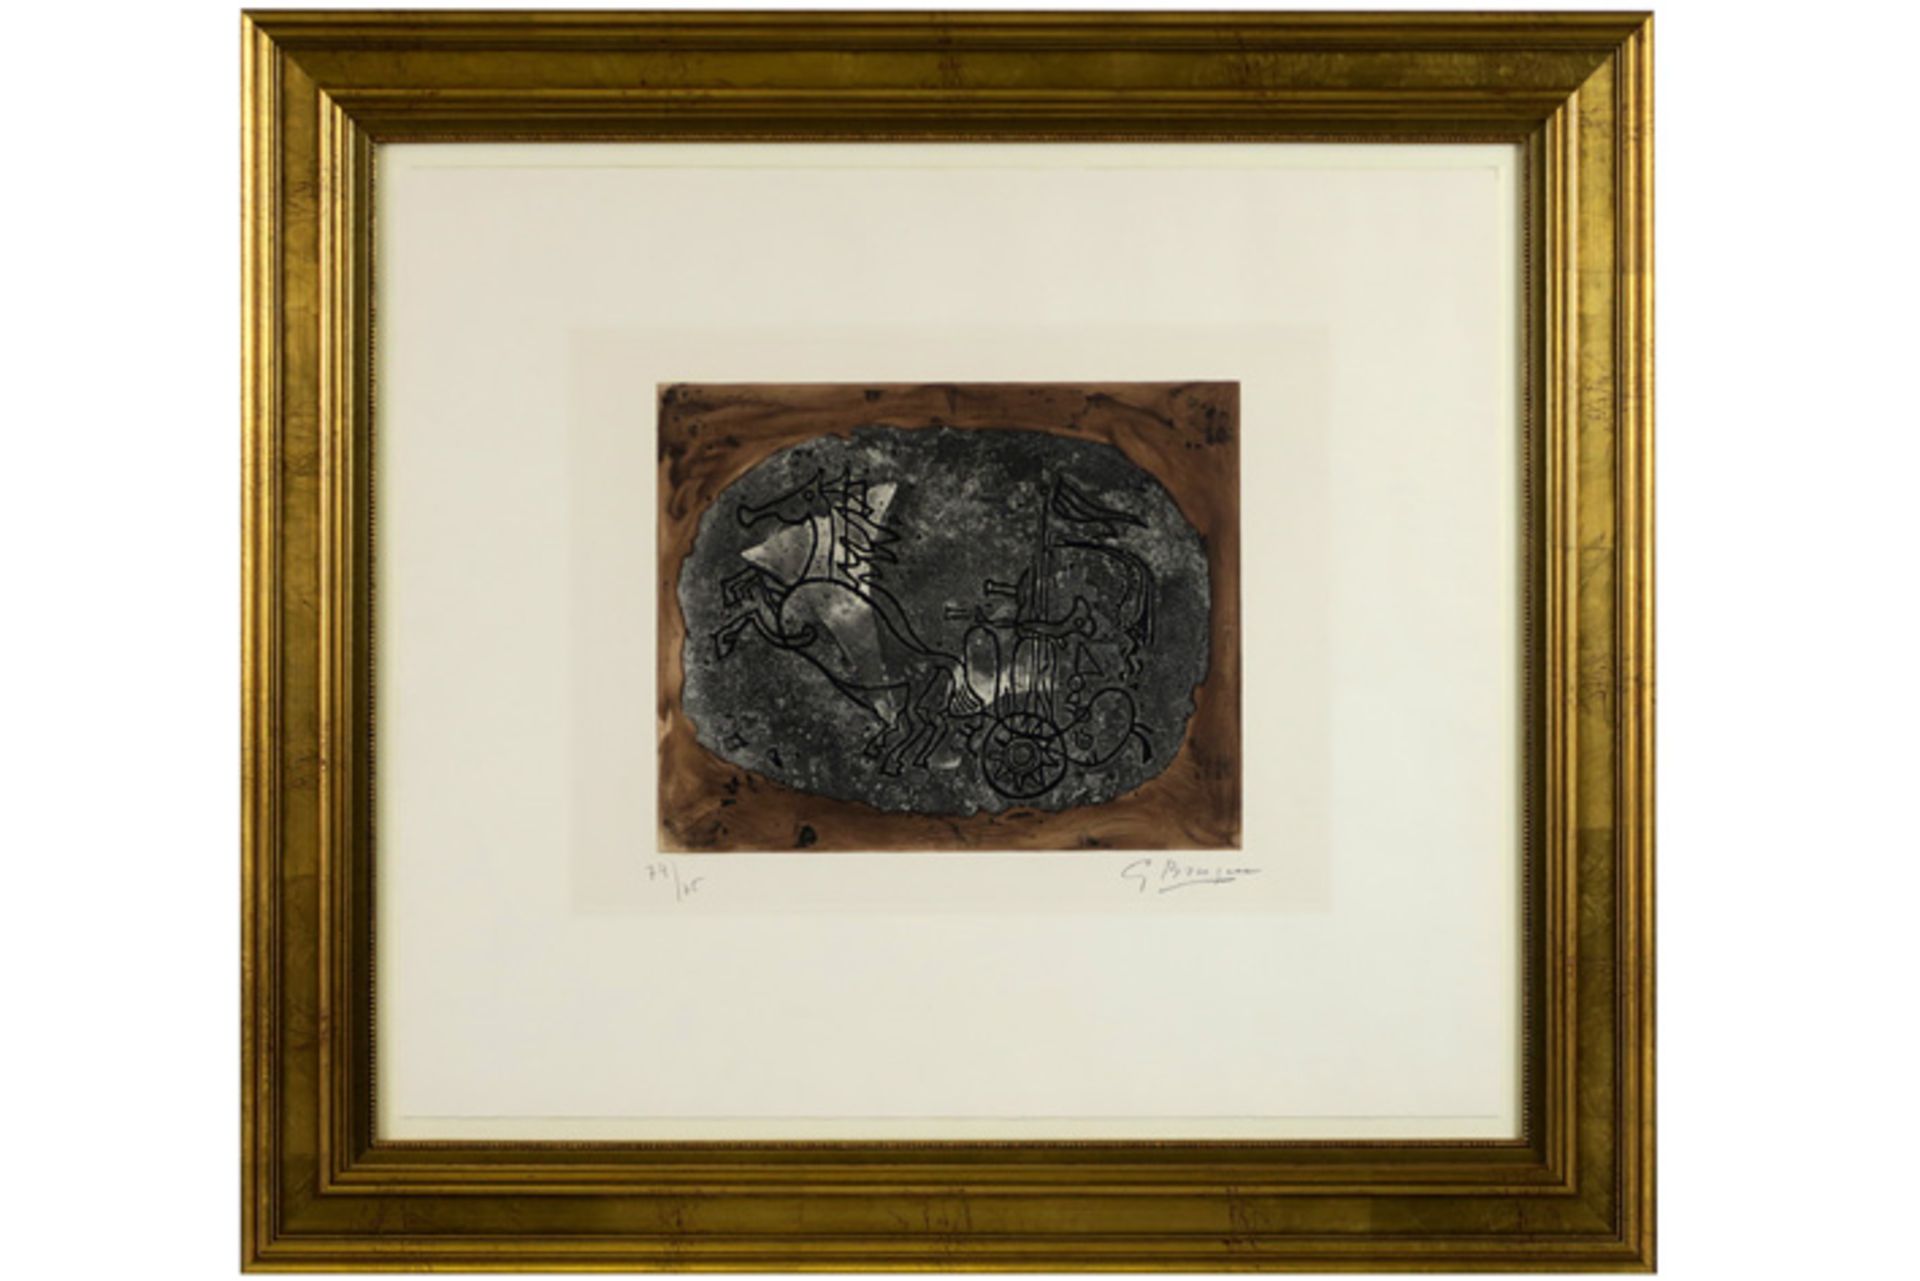 Georges Braque "Black Cat" etching dd 1958 - signed BRAQUE GEORGES (1882 - 1963) ets in kleur n° - Image 3 of 3